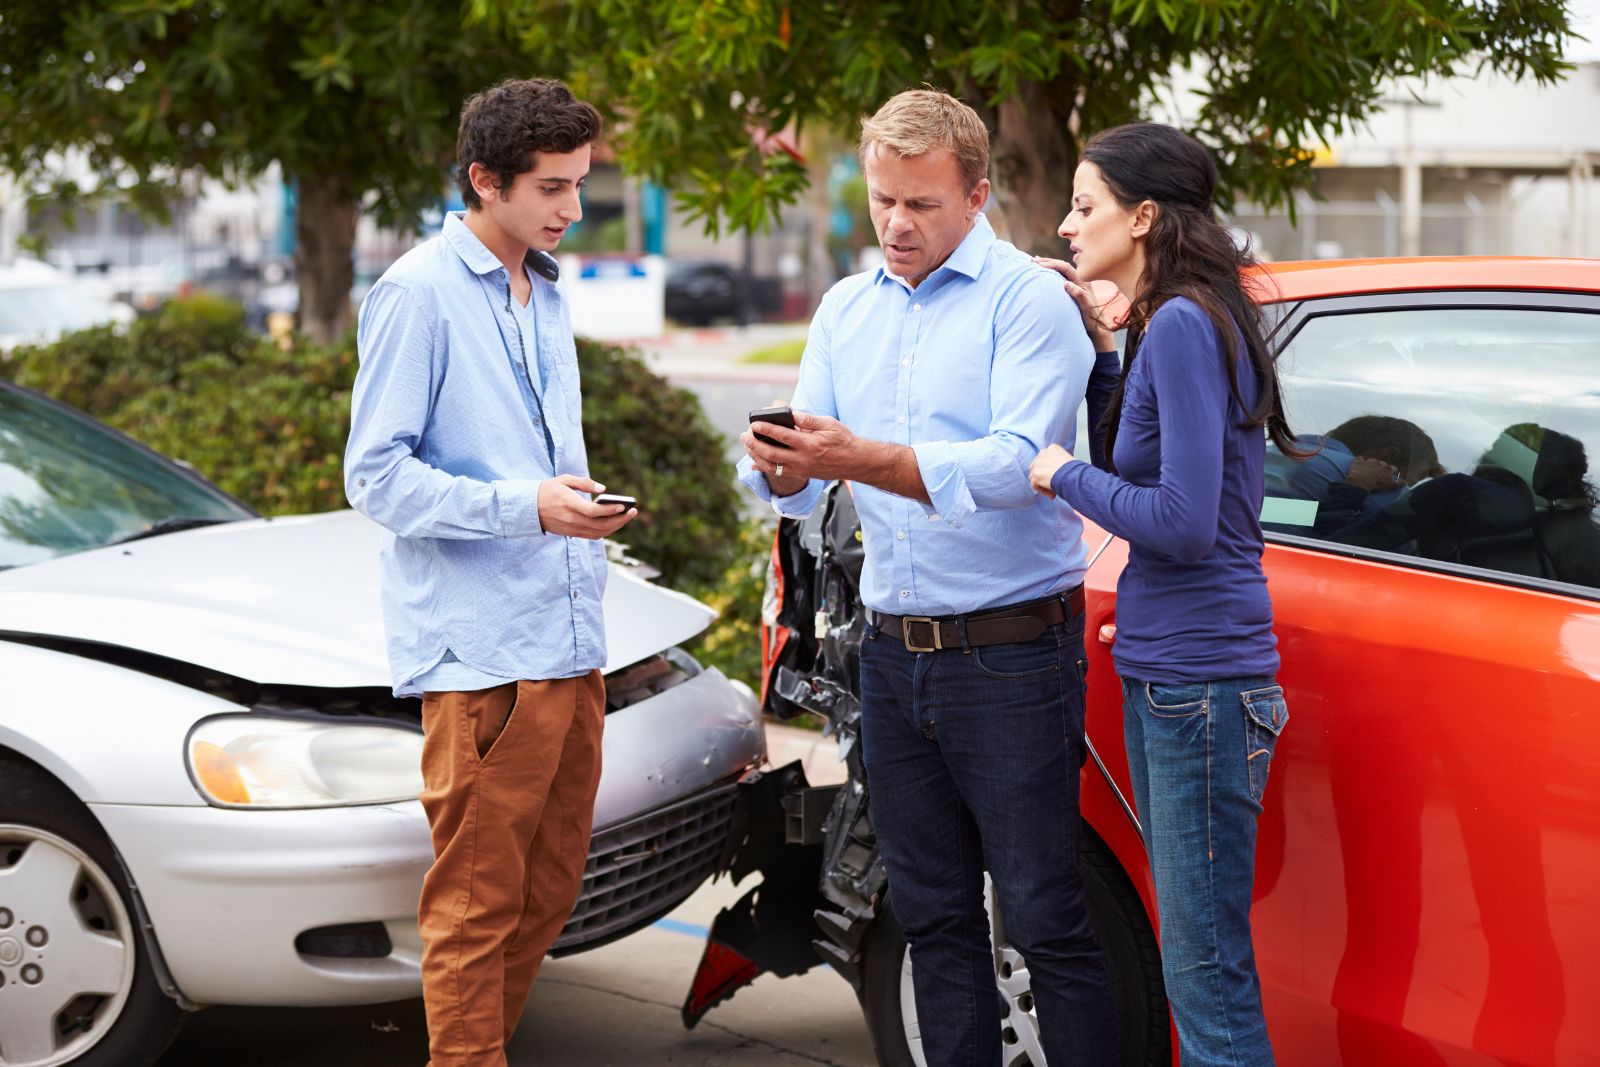 Car incident or accident exchange between involved individuals